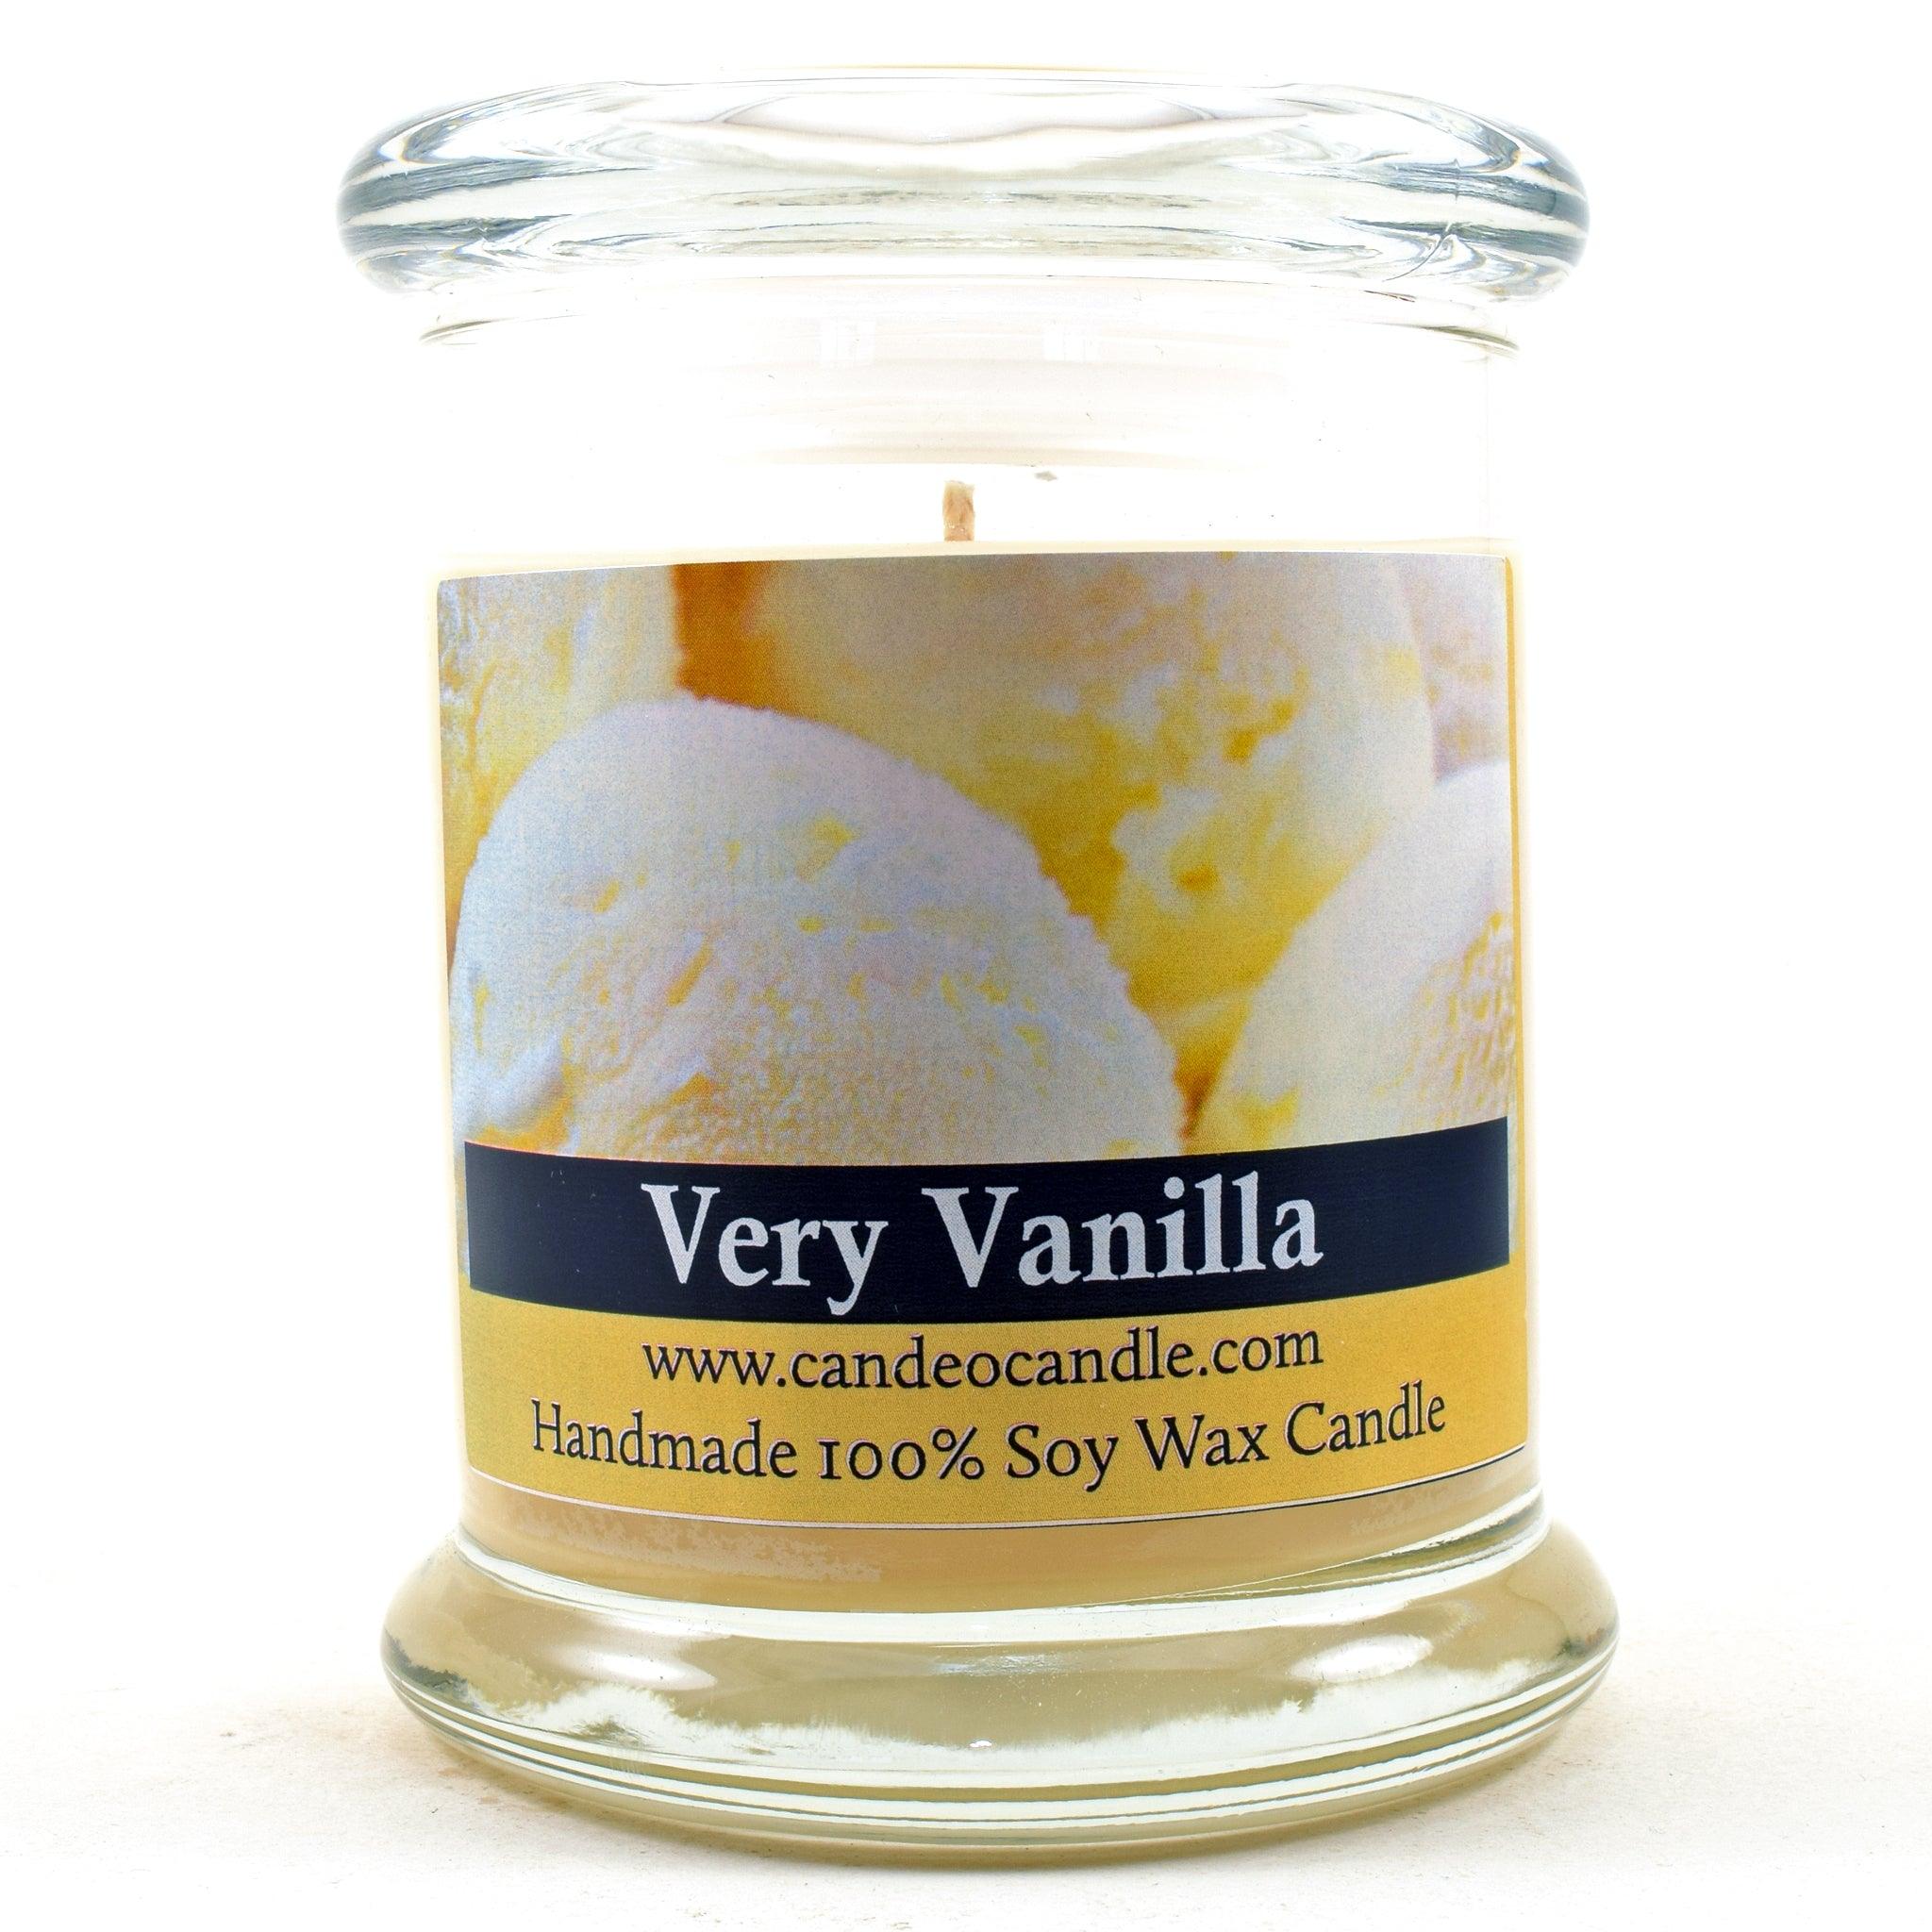 Very Vanilla, 9oz Soy Candle Jar - Candeo Candle